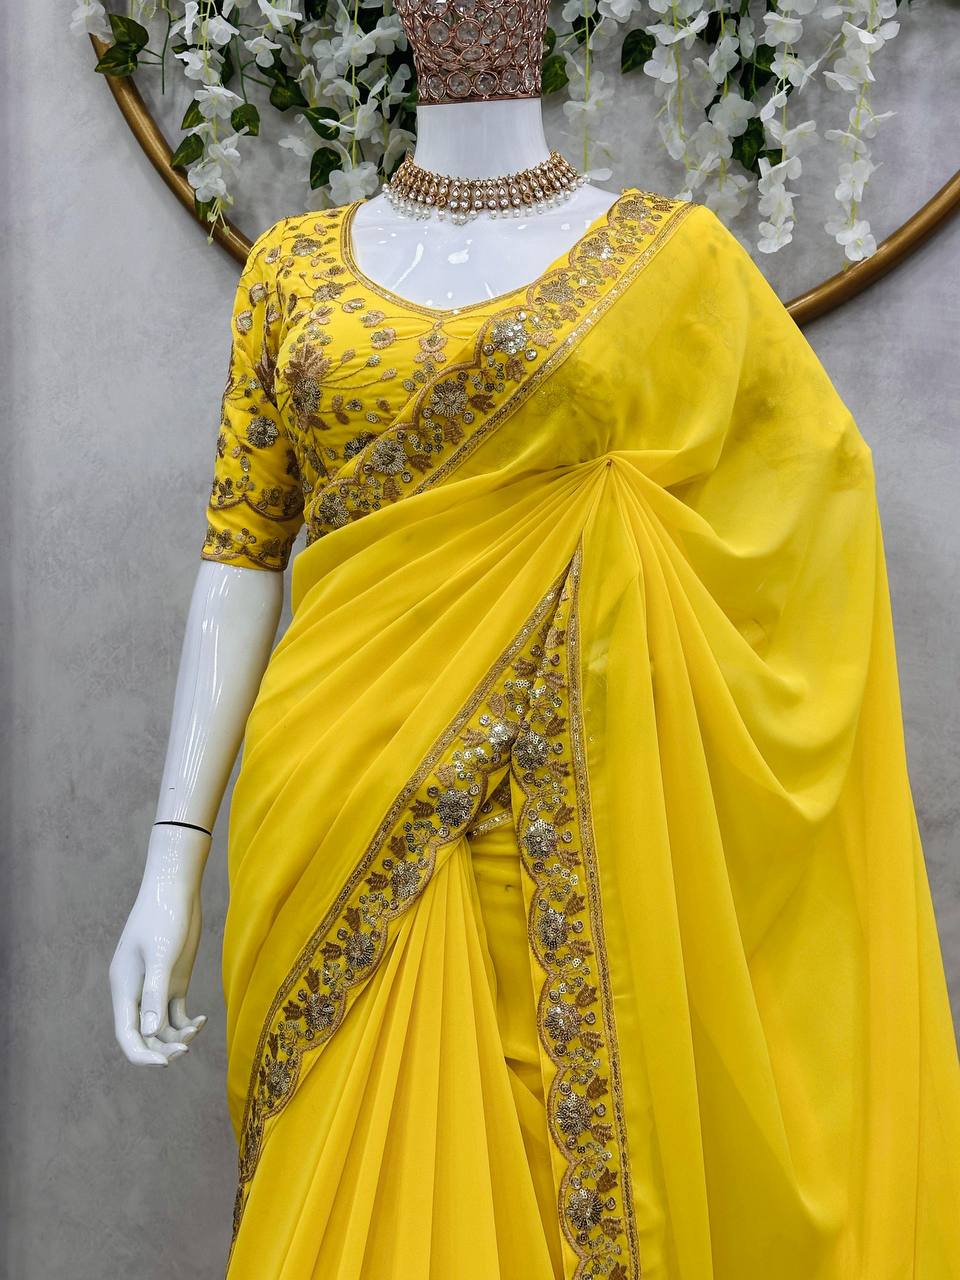 "Grace and Elegance in Every Drape: Faux Georgette Sarees!"